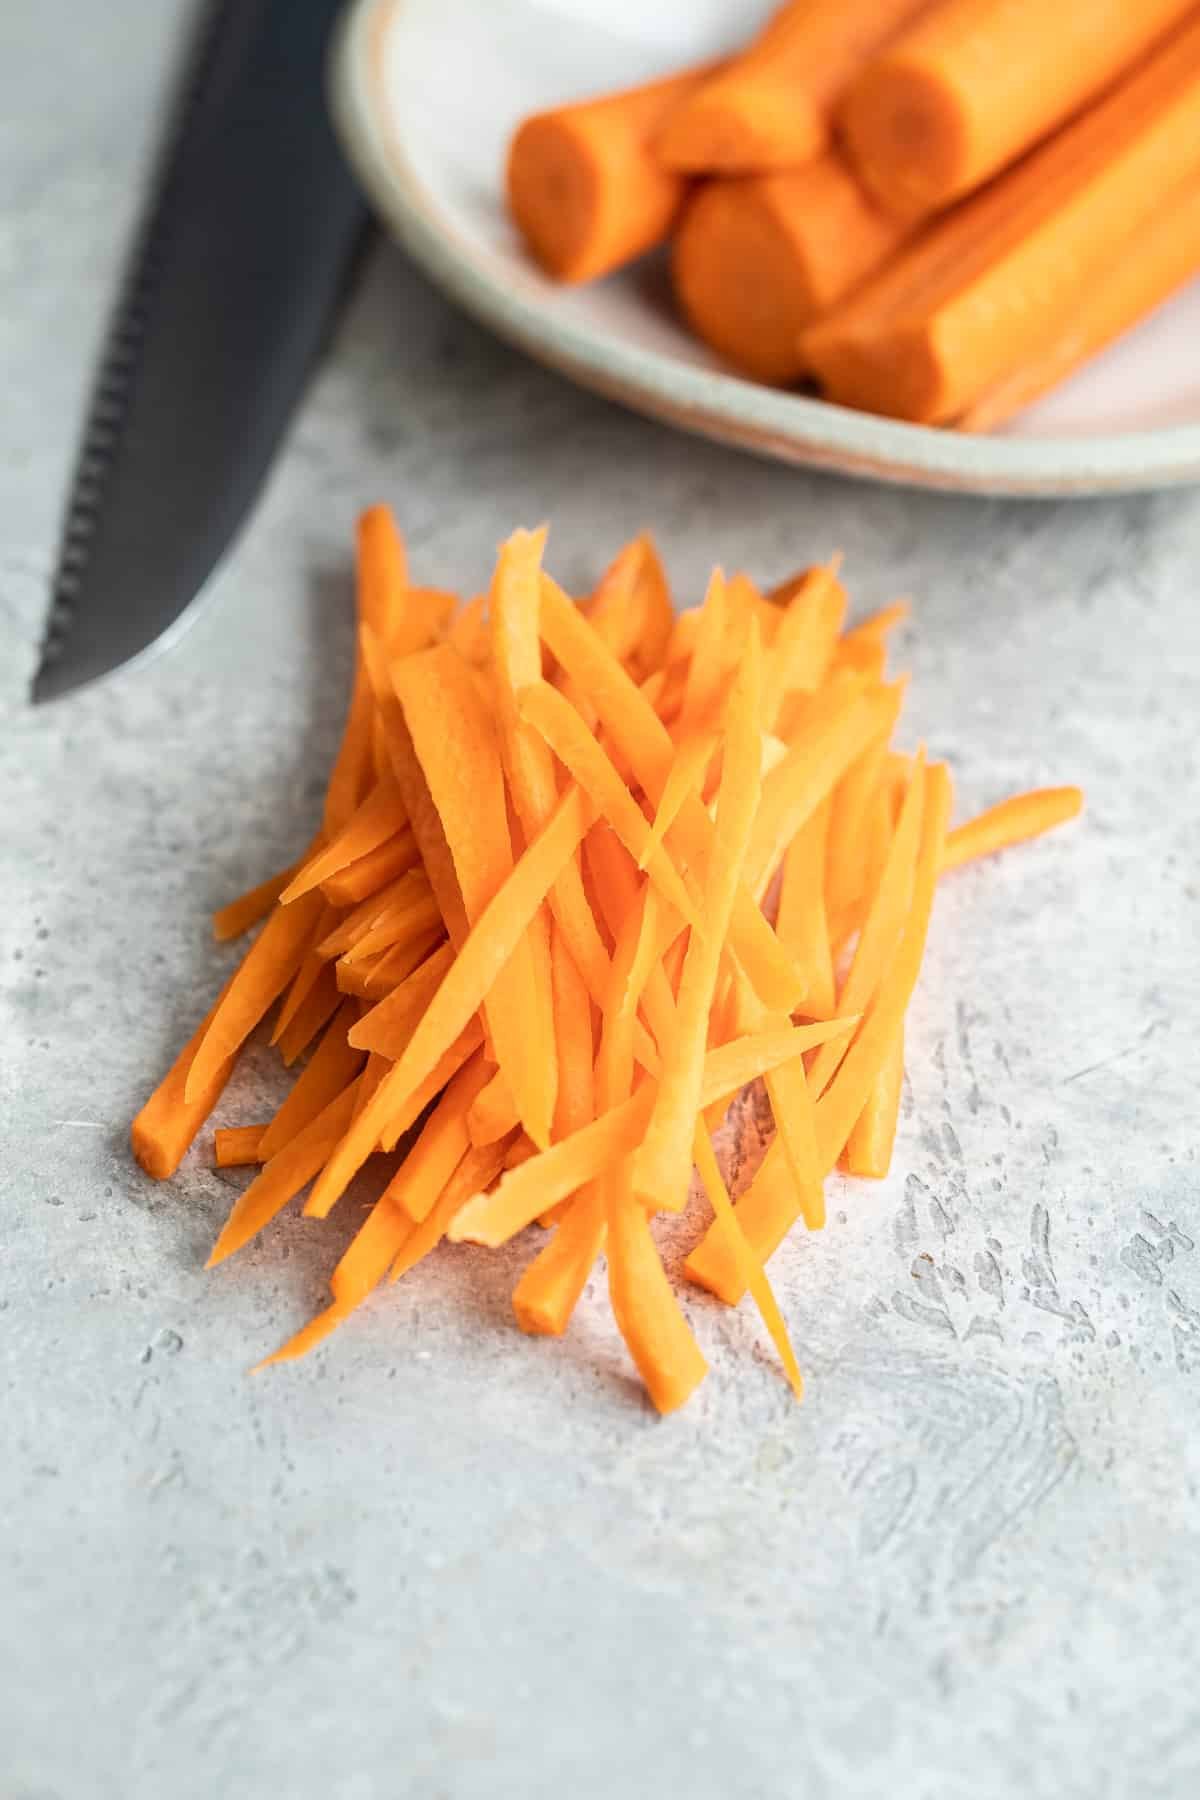 A pile of Julienned carrots on a countertop.